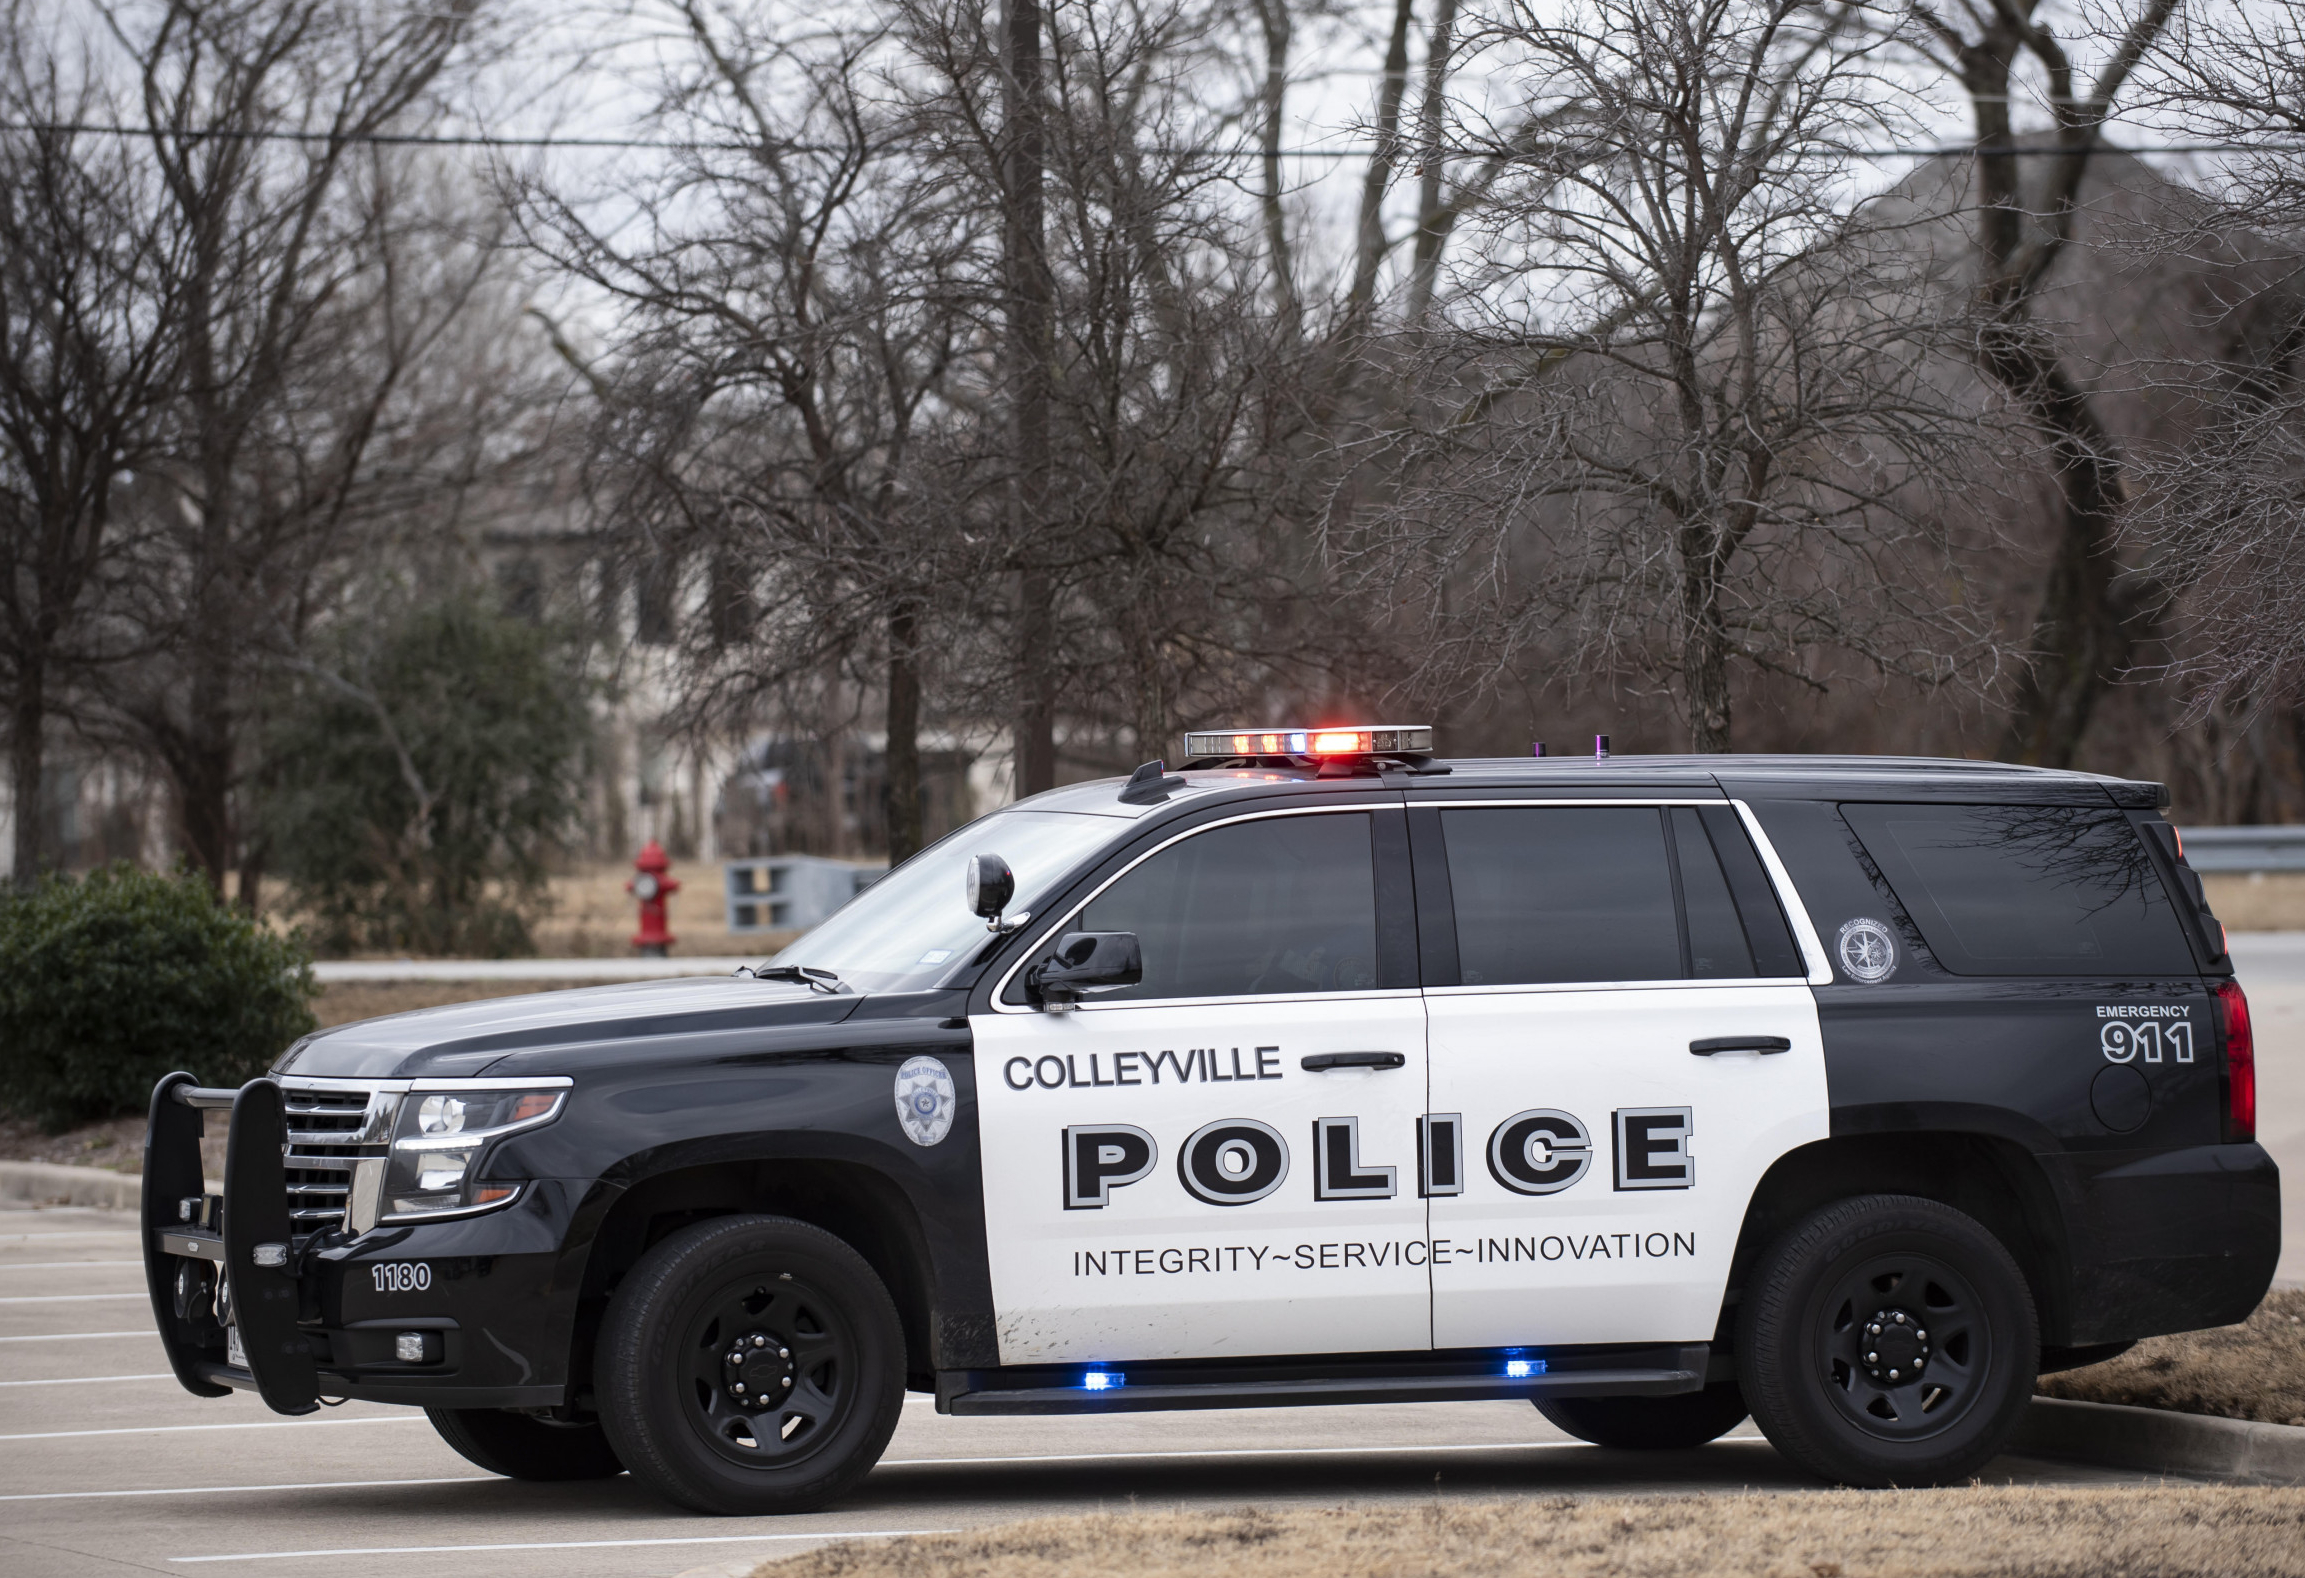 A Colleyville Police vehicle in the street.